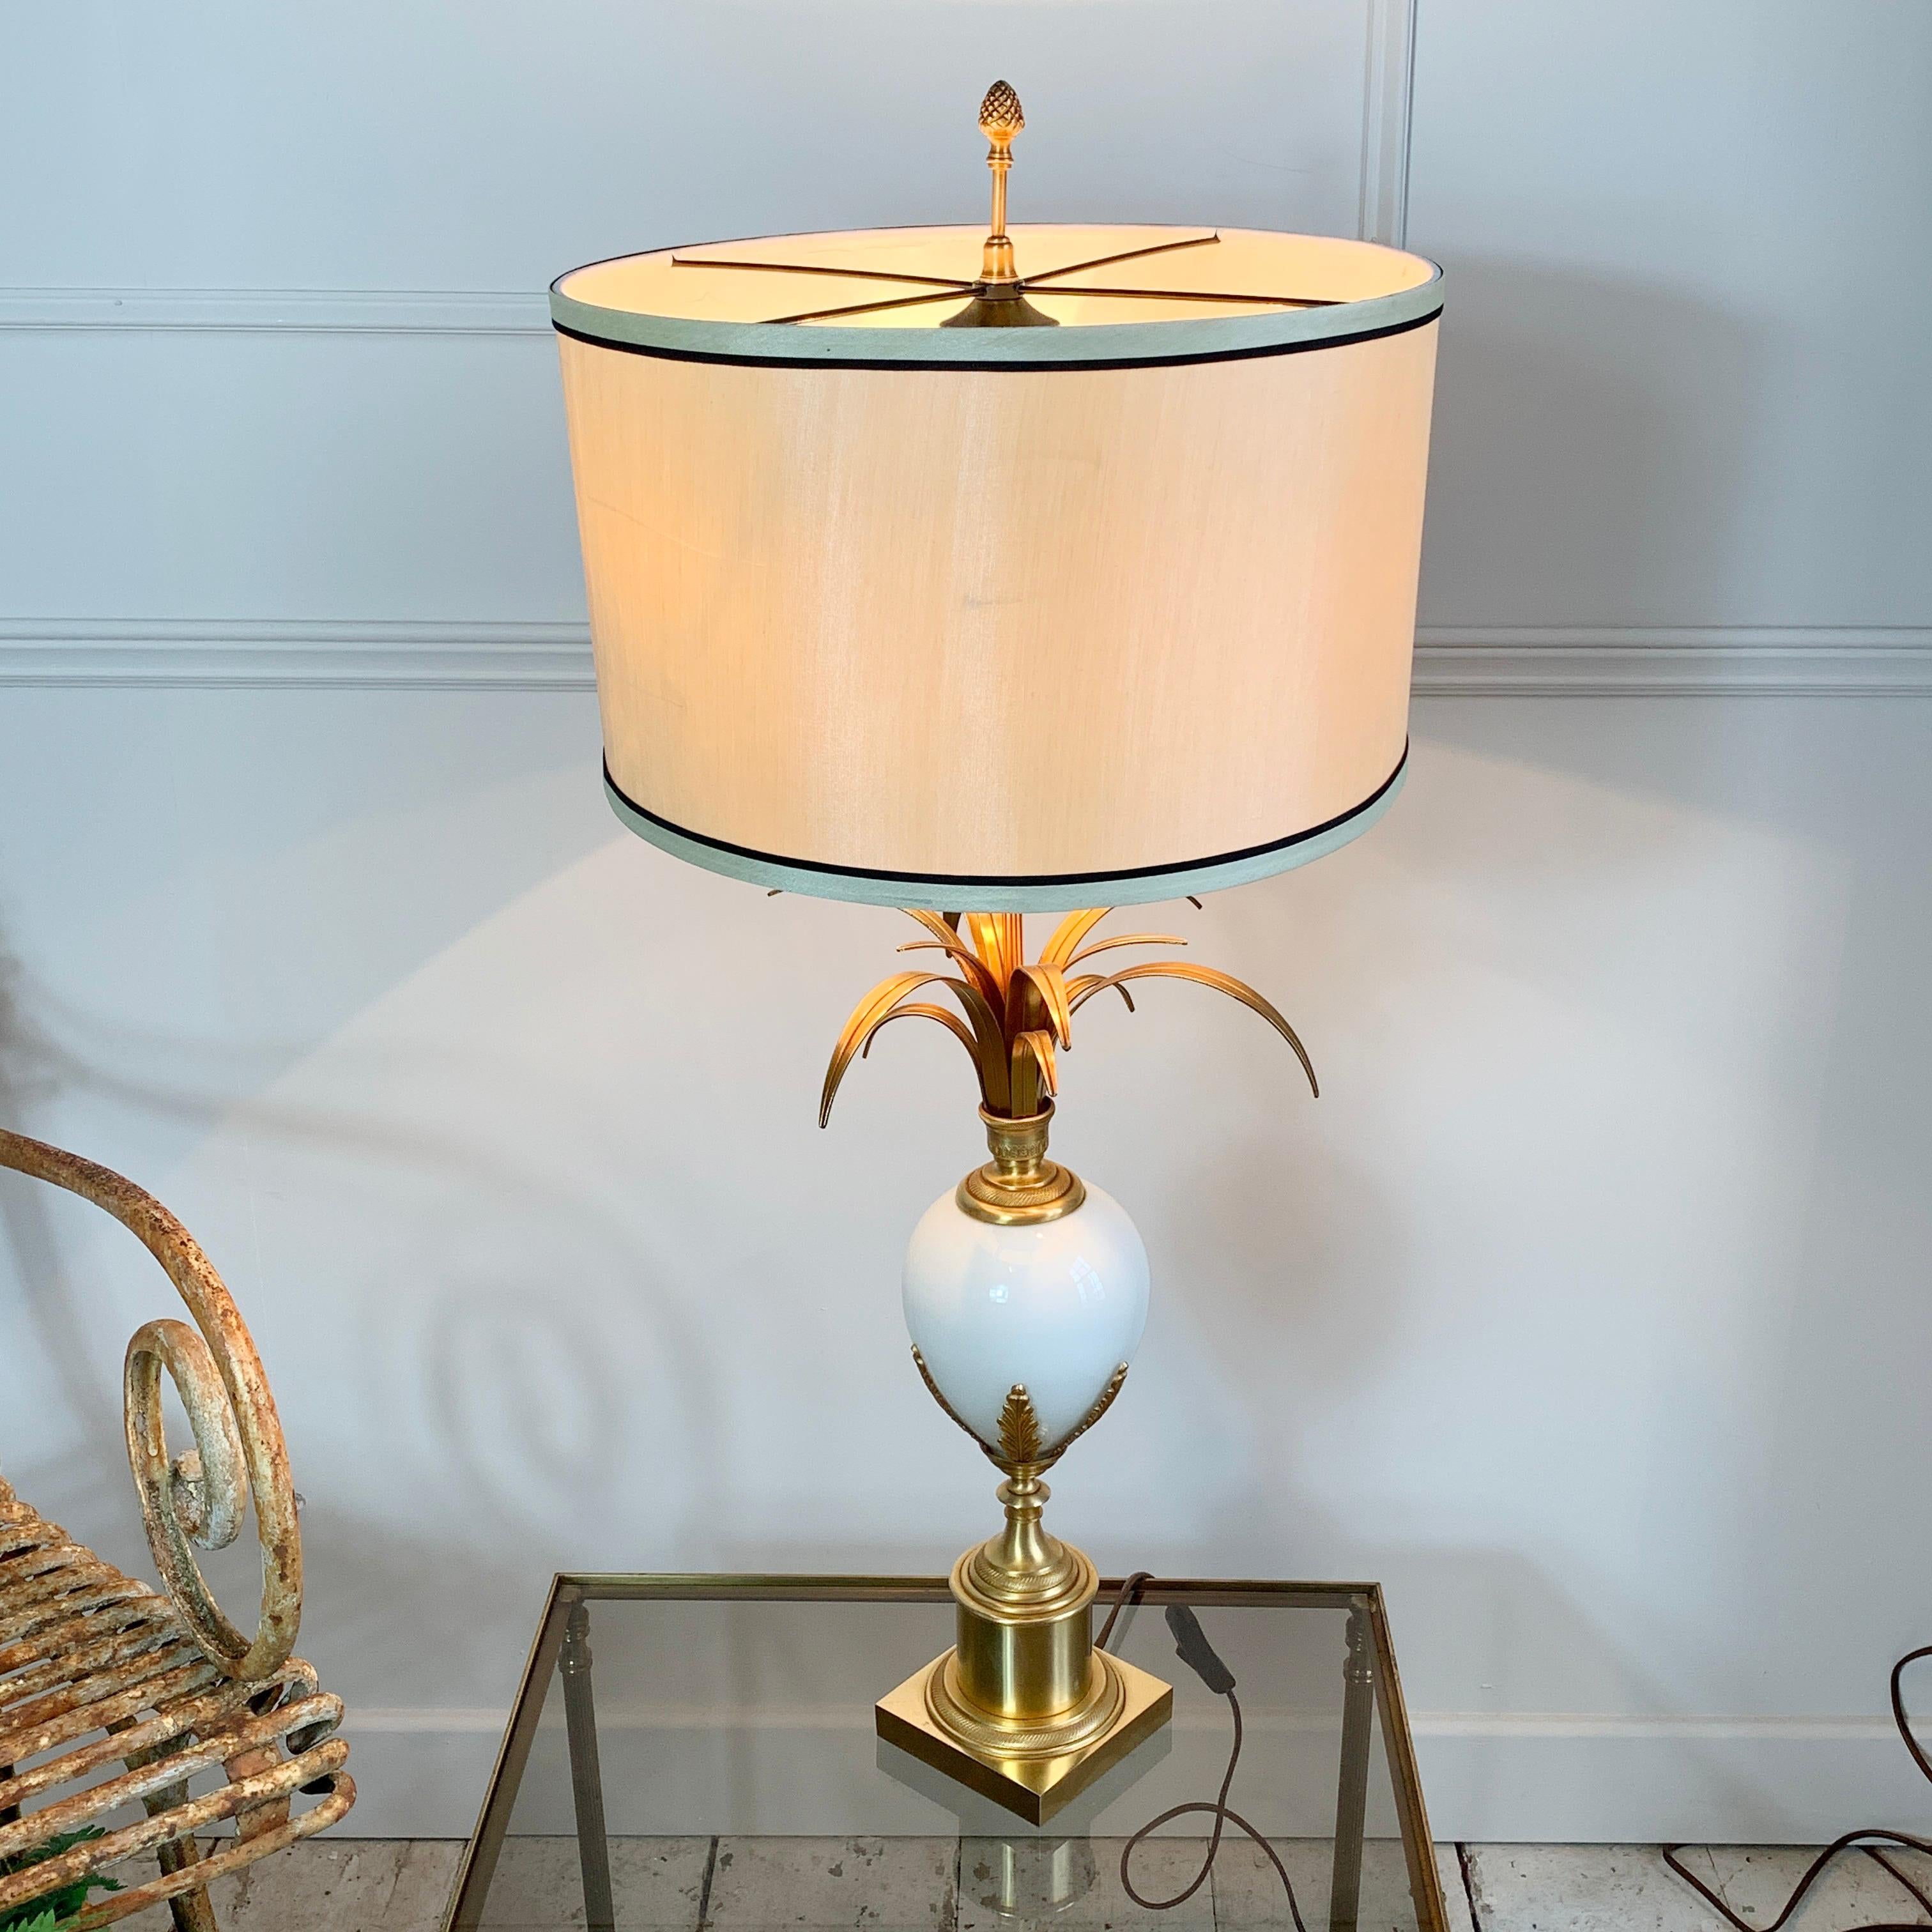 20th Century Maison S.A Boulanger White Opalescent Ostrich Egg Lamp For Sale